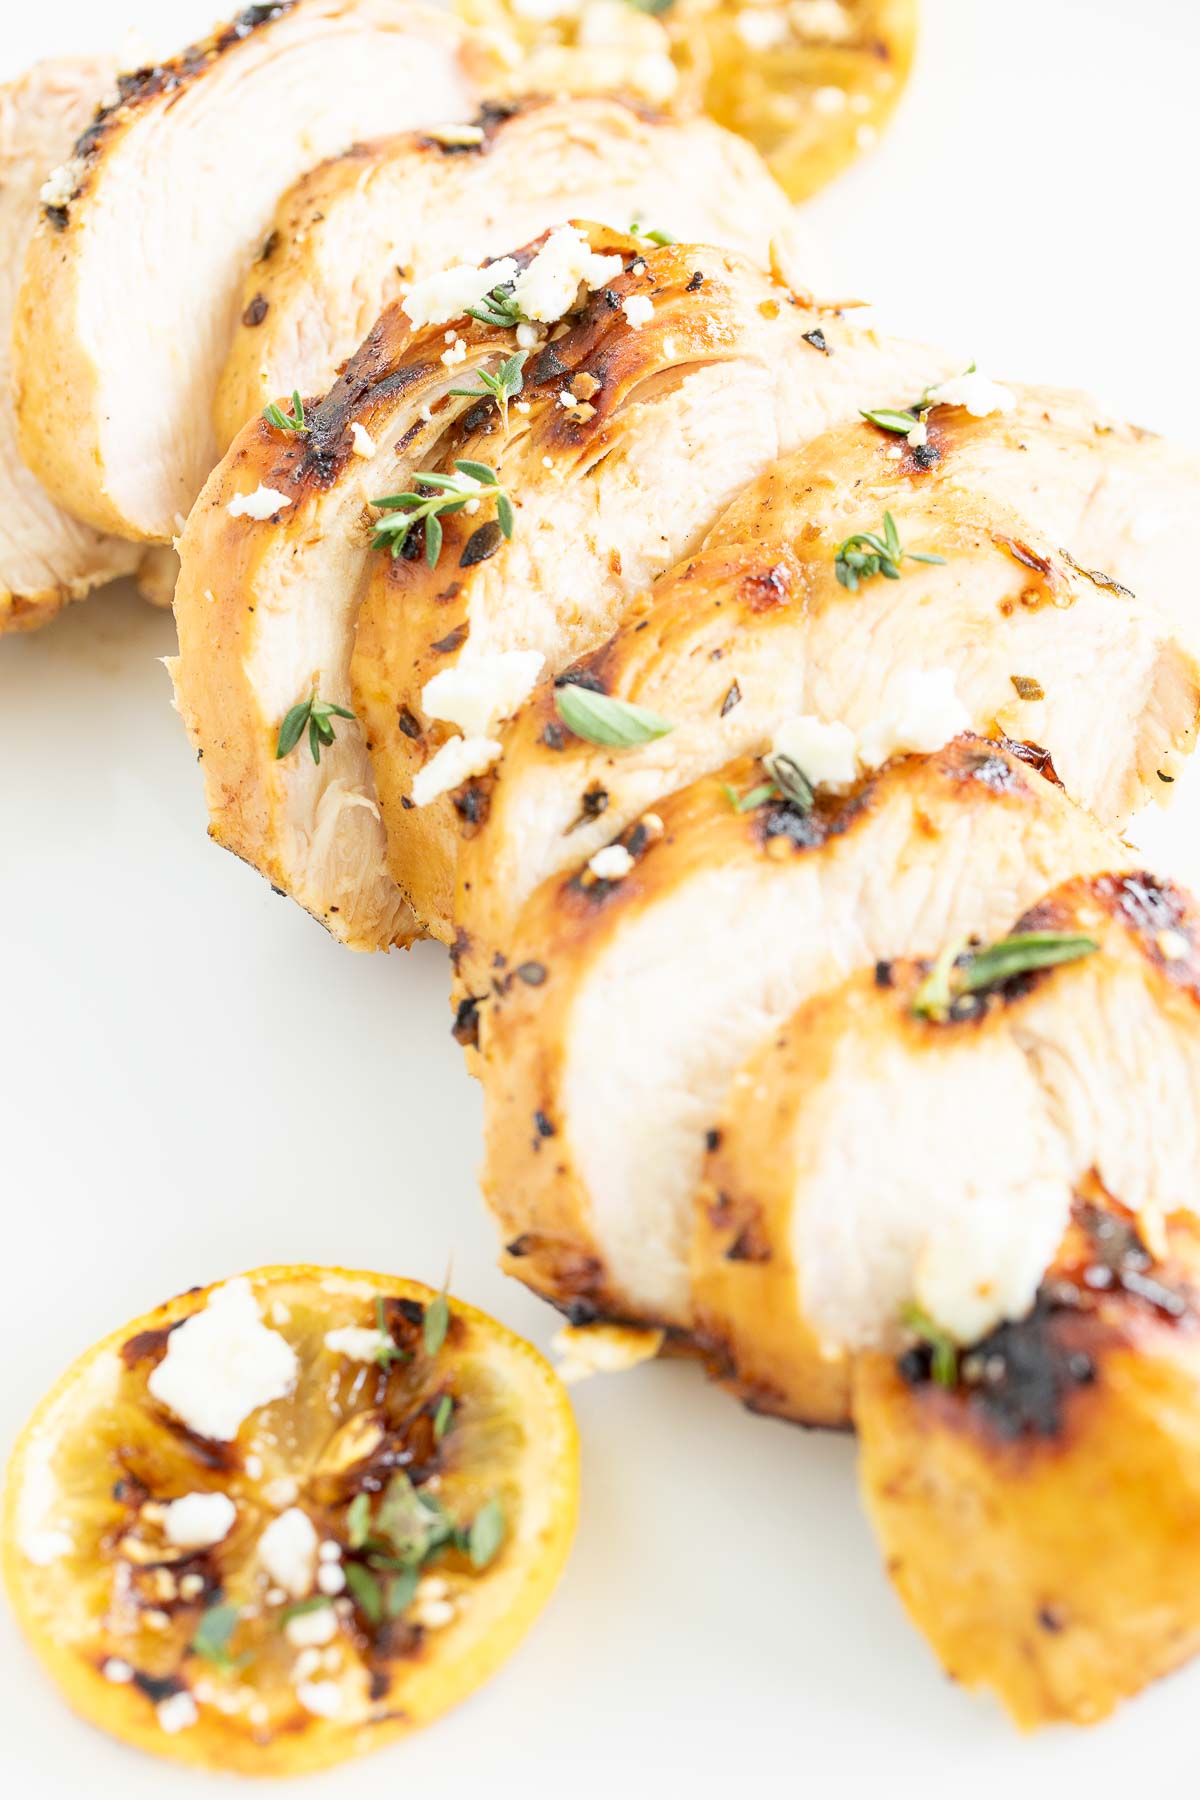 Slices of Greek marinated chicken on a white surface, grilled lemon to the side.